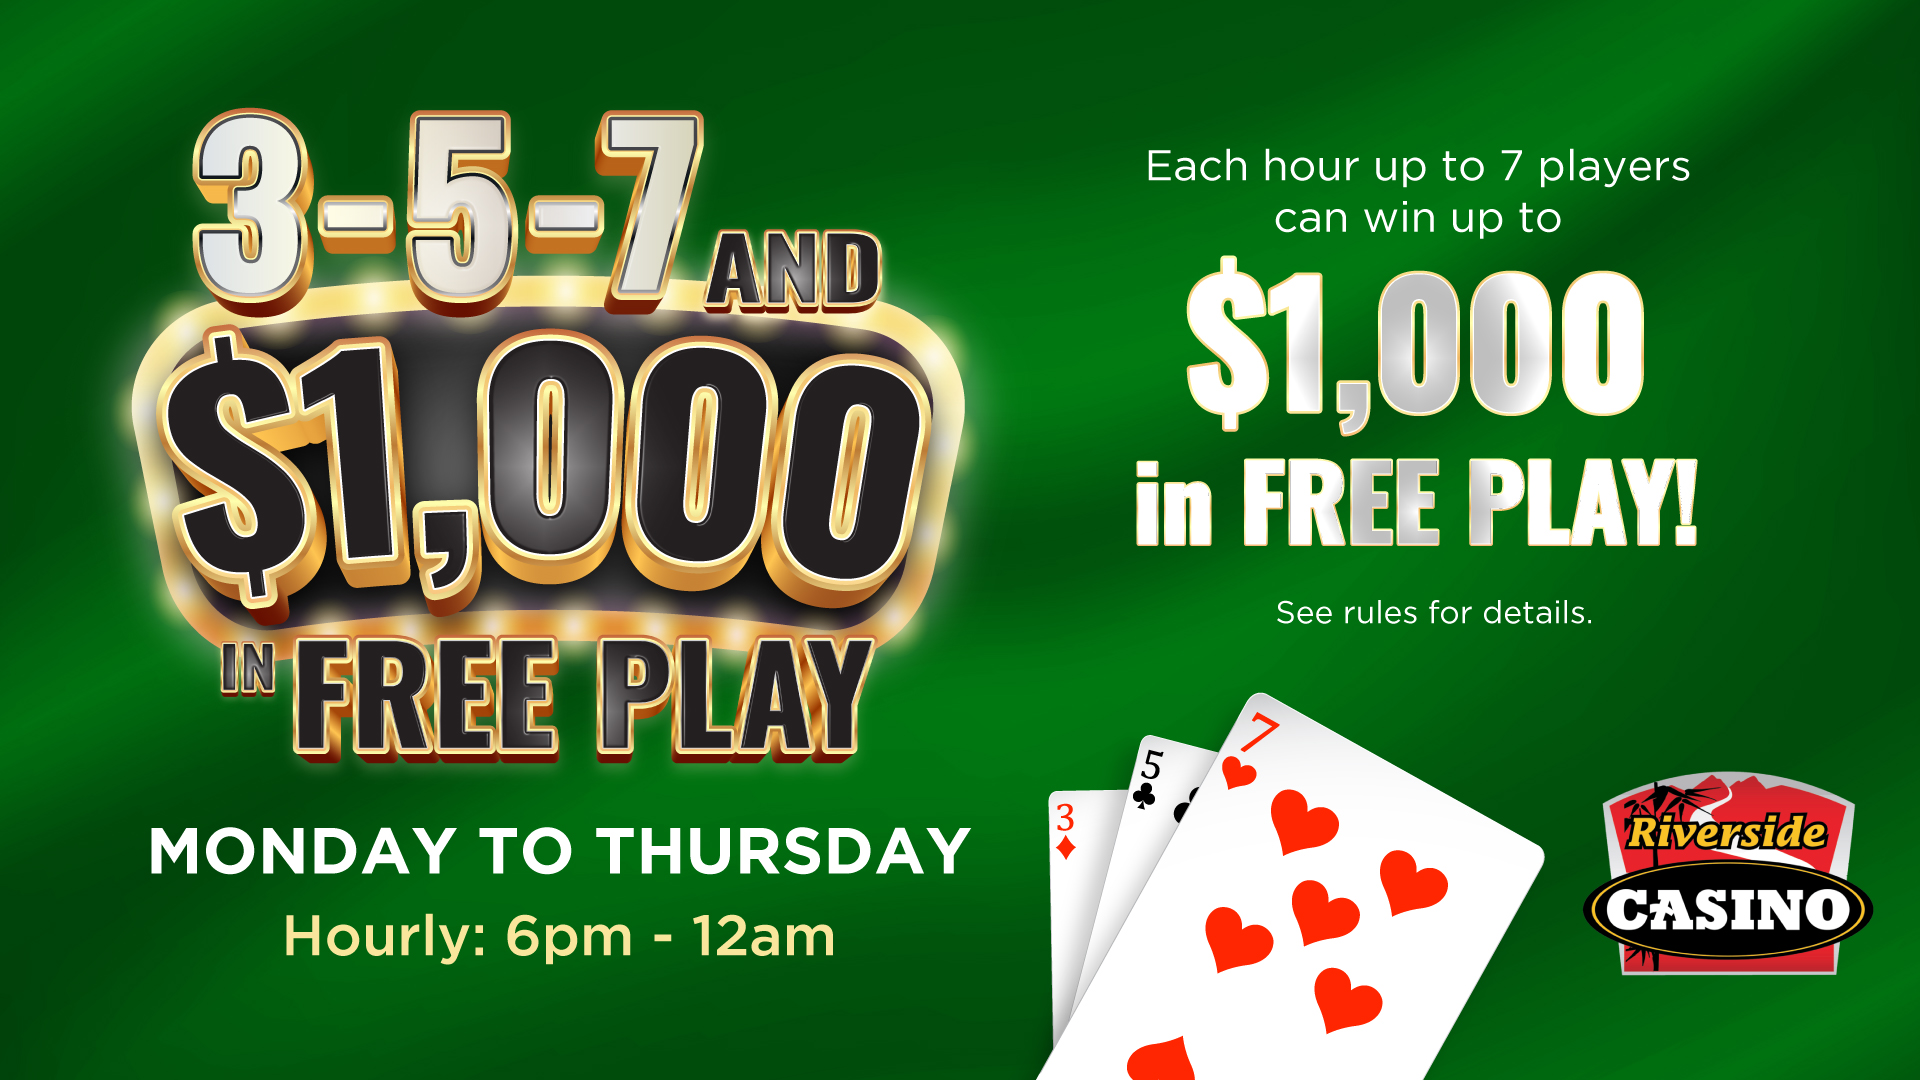 3-5-7 and $1,000 in Free Play Mon-Thurs Hourly: 6pm-12am Each hour up to 7 players can win up to $1,000 in Free Play!